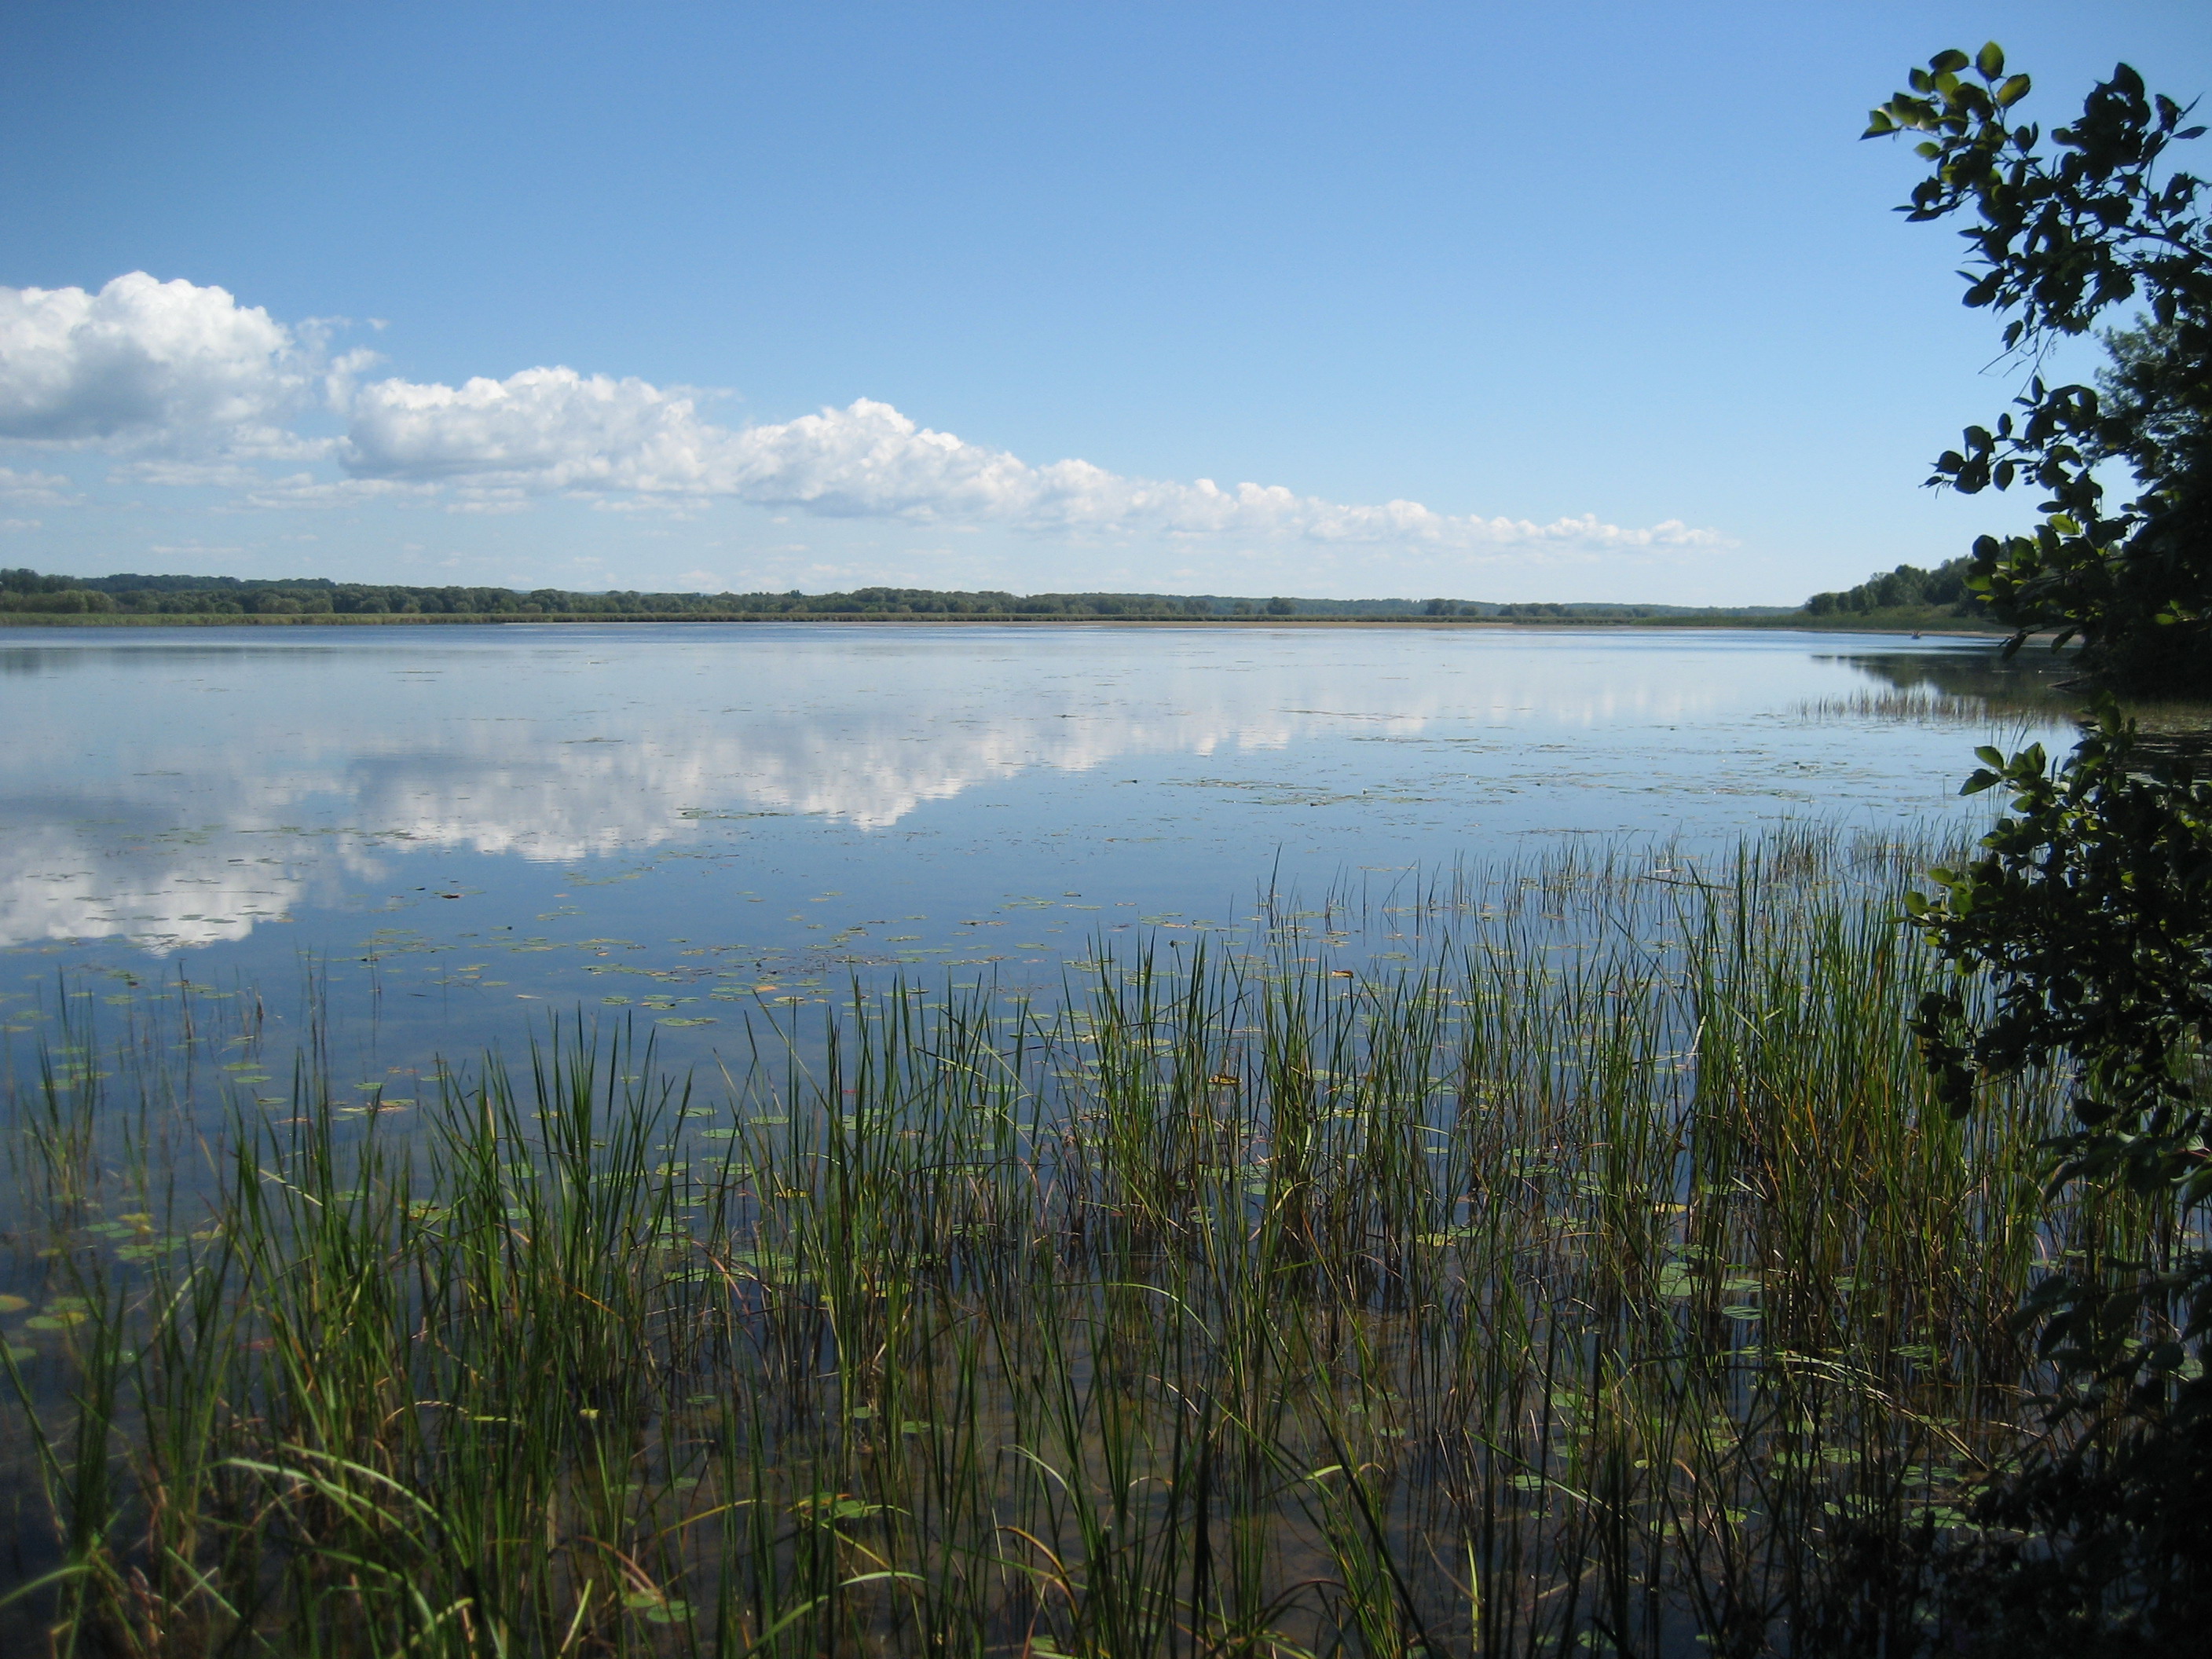 File:Lakeview Pond NY.jpg - Wikimedia Commons